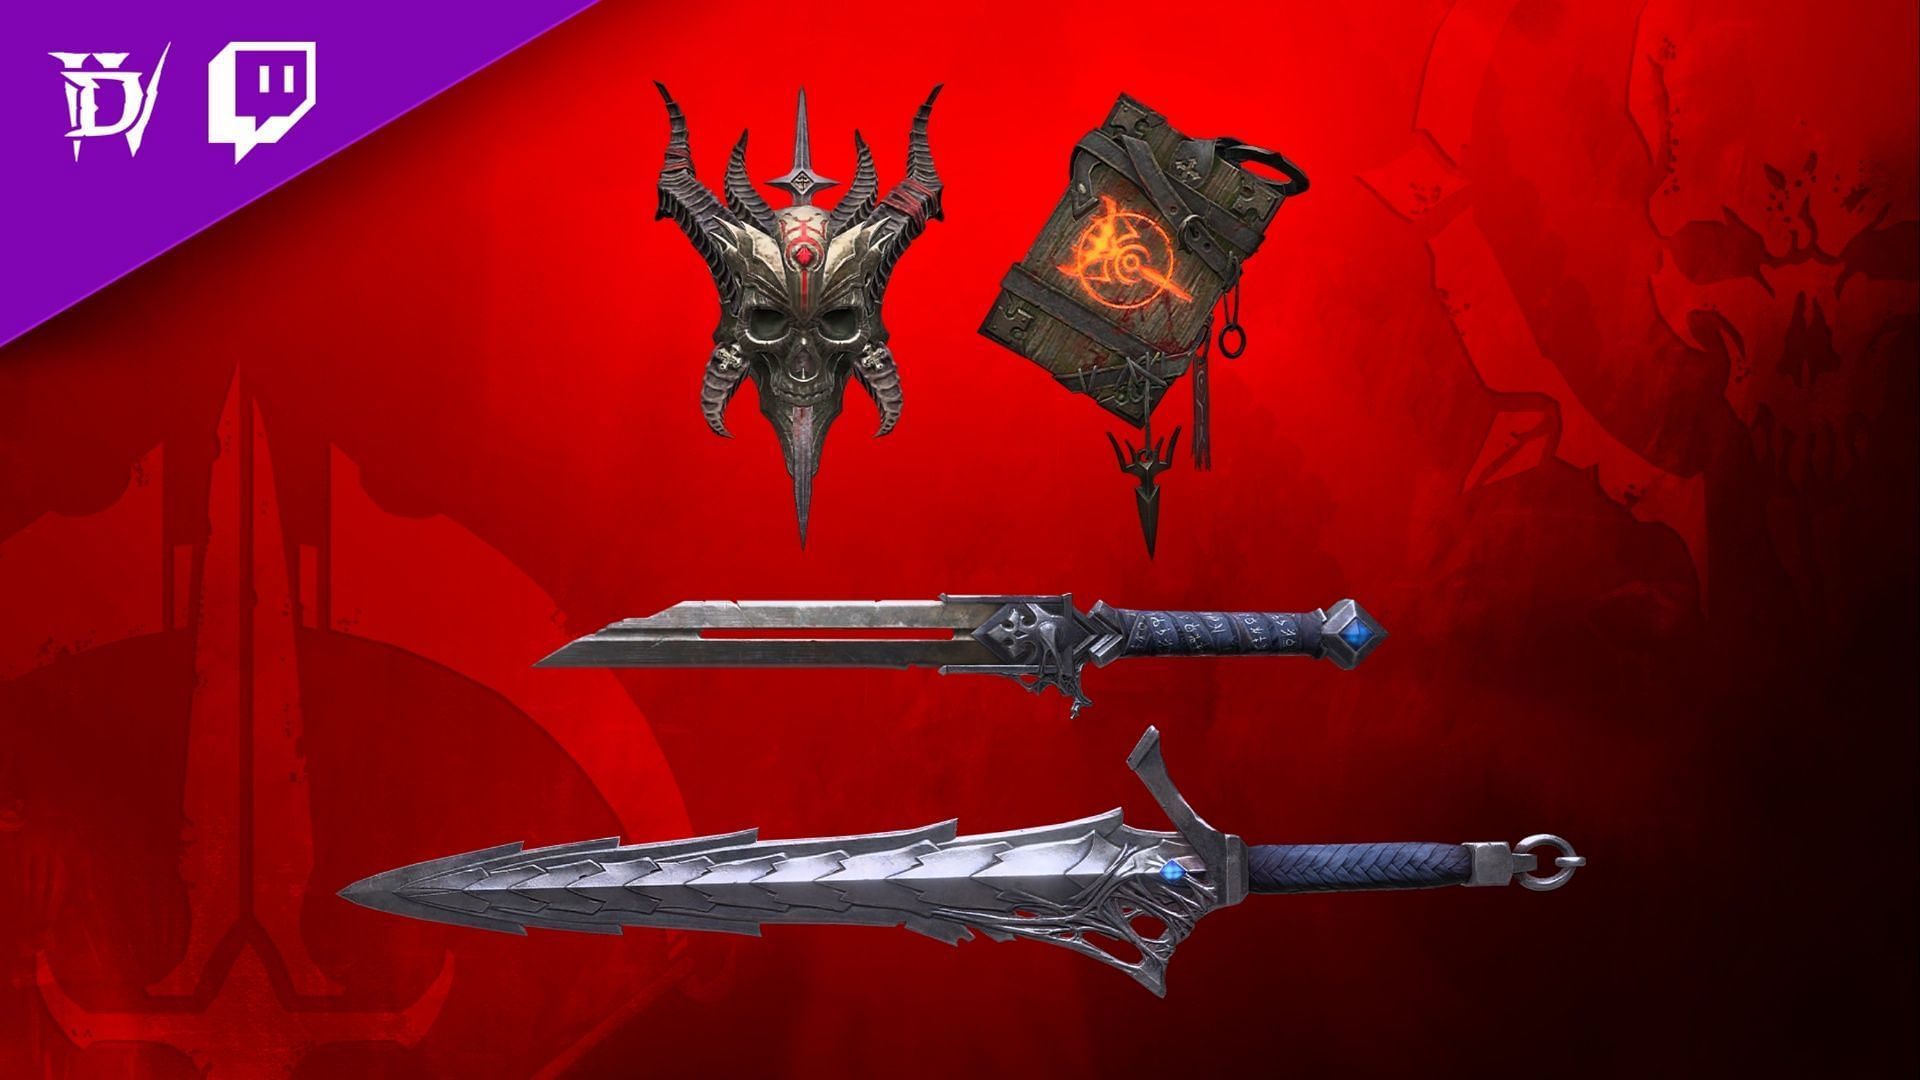 Each class will have fantastic Twitch drops waiting for them for Diablo 4.